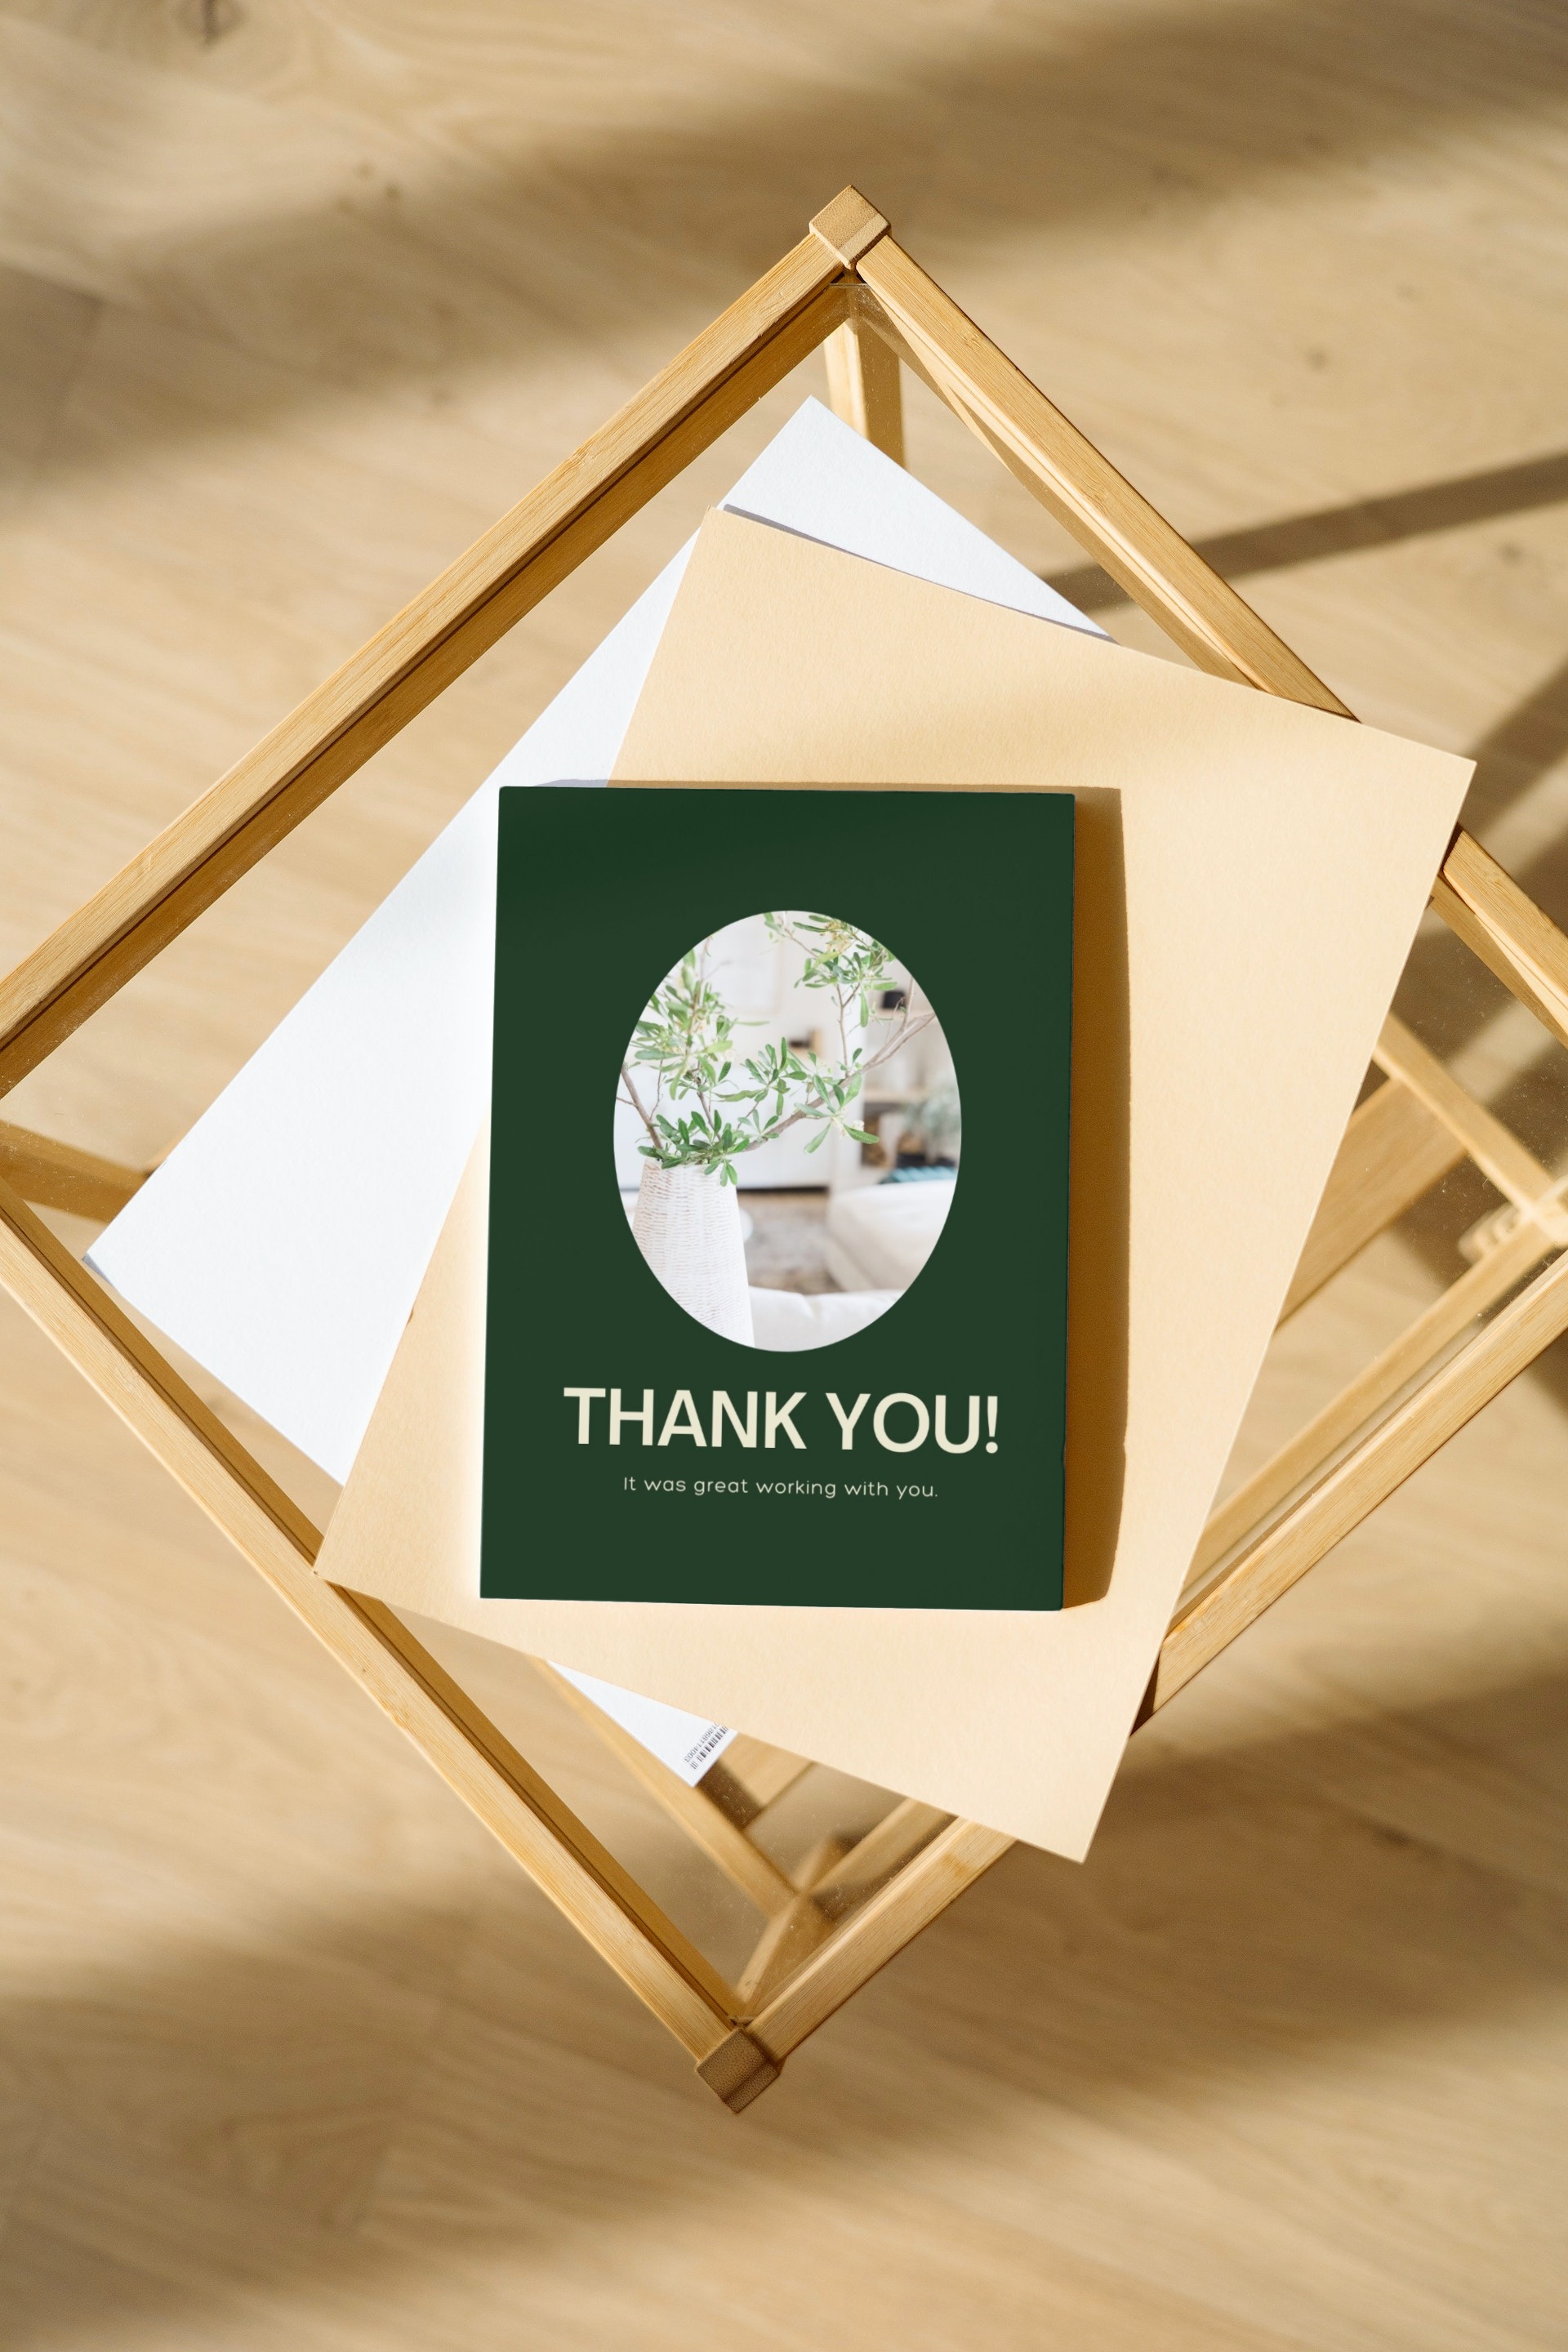 Thank You Card From Realtor To Seller After Closing - Design 8 (with greeting)